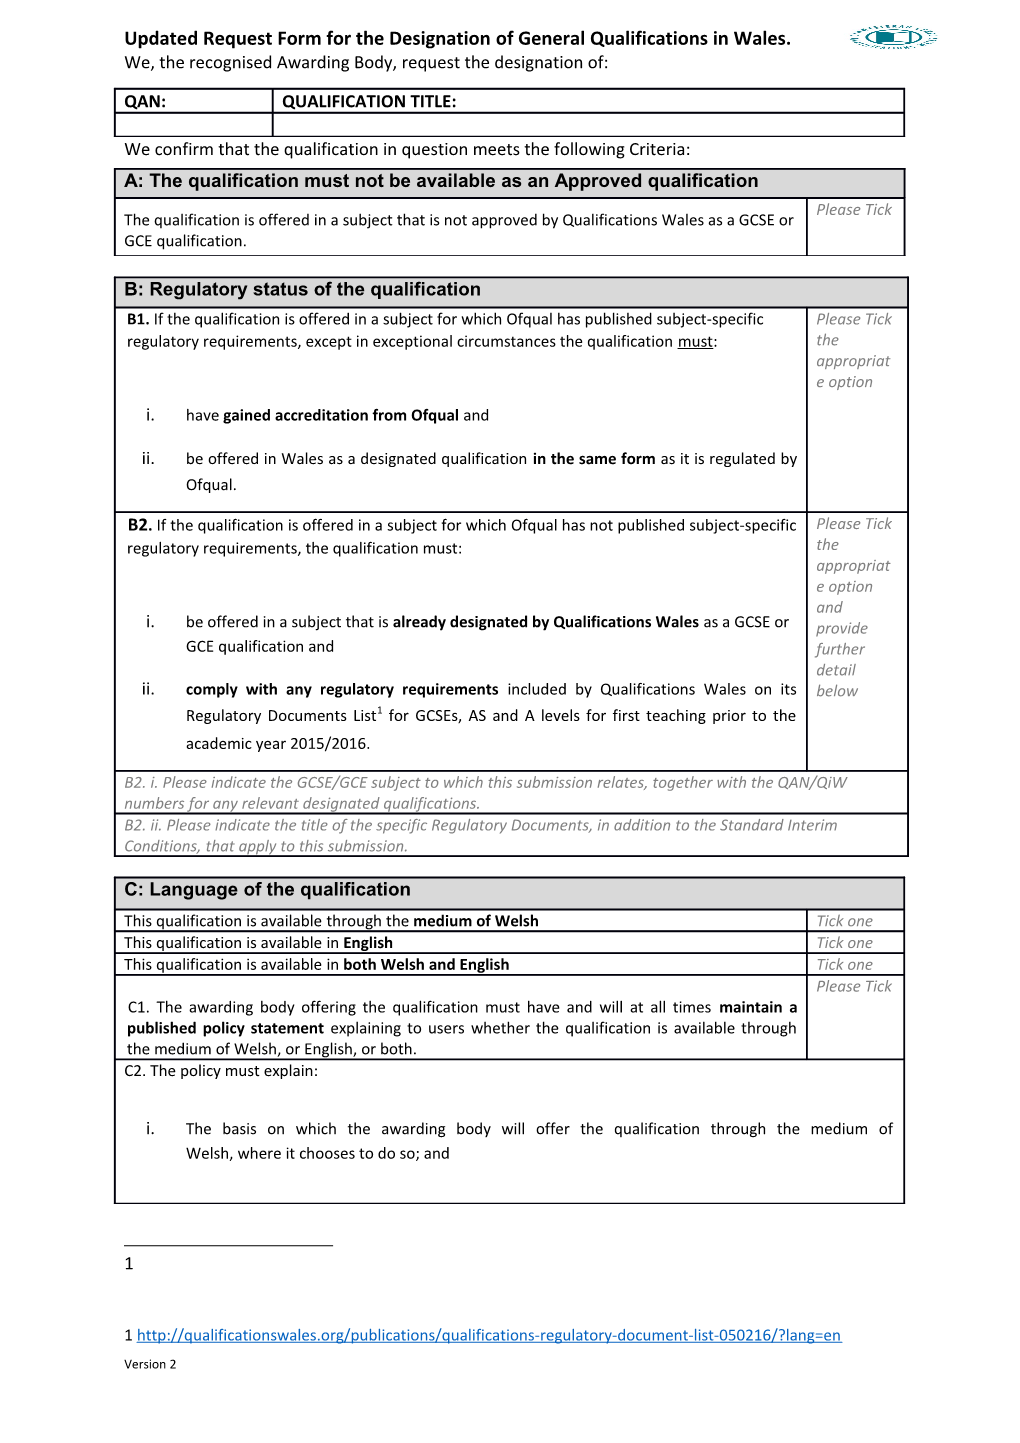 Updated Request Form for the Designation of General Qualifications in Wales